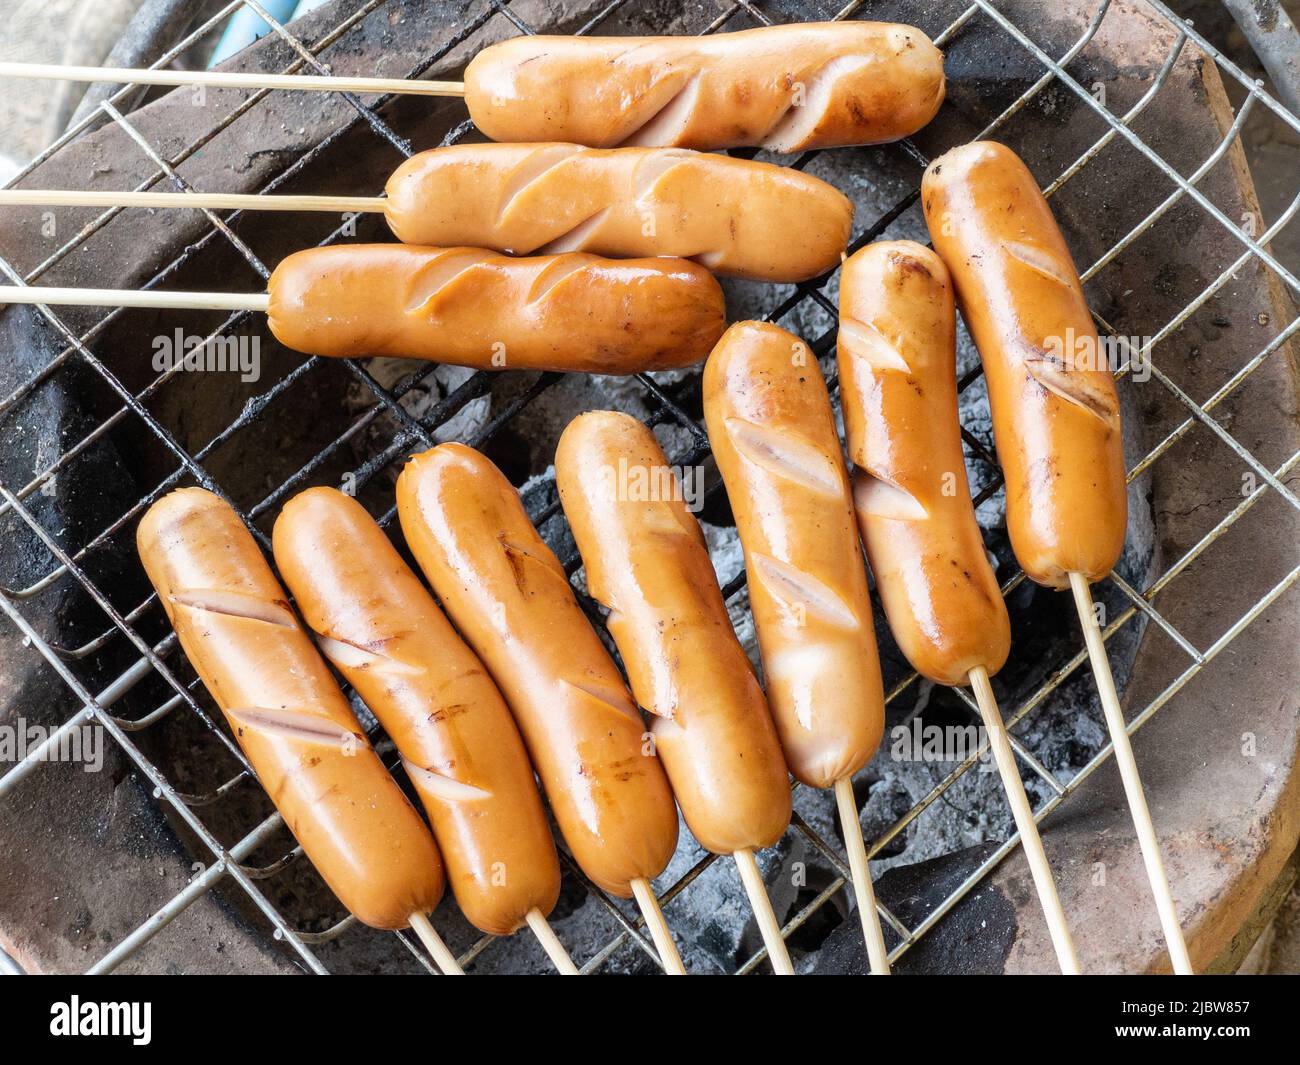 https://c8.alamy.com/comp/2JBW857/the-pork-sausage-skewers-are-grilled-on-a-metal-grill-on-the-stovetop-outside-the-local-house-top-view-with-the-copy-space-2JBW857.jpg